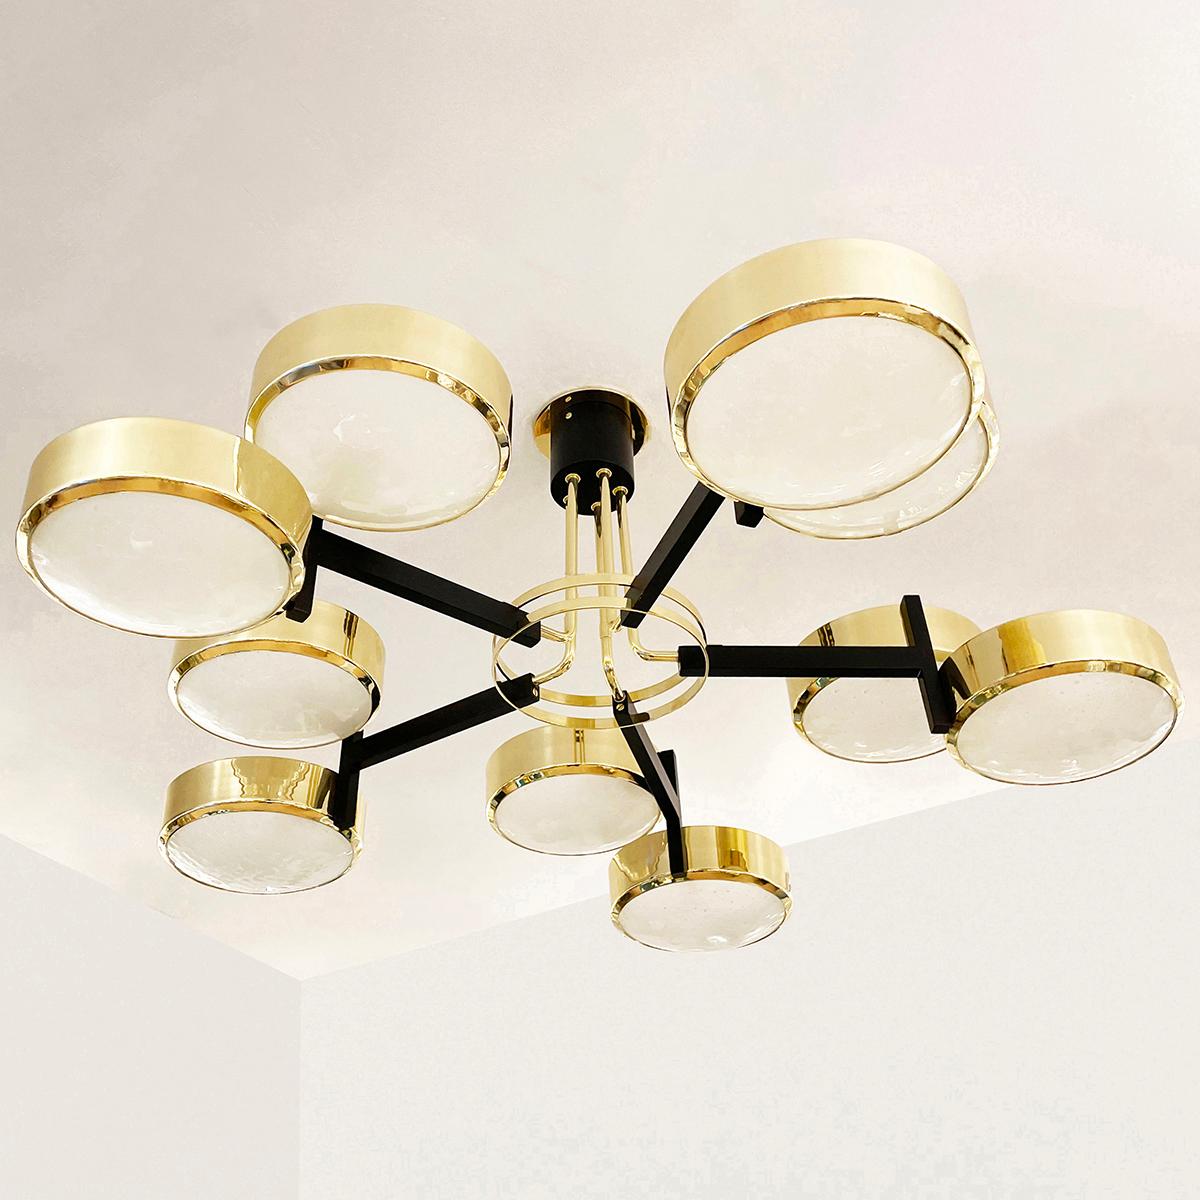 Modern Eclissi Grande Ceiling Light by Gaspare Asaro - Murano Glass Version For Sale